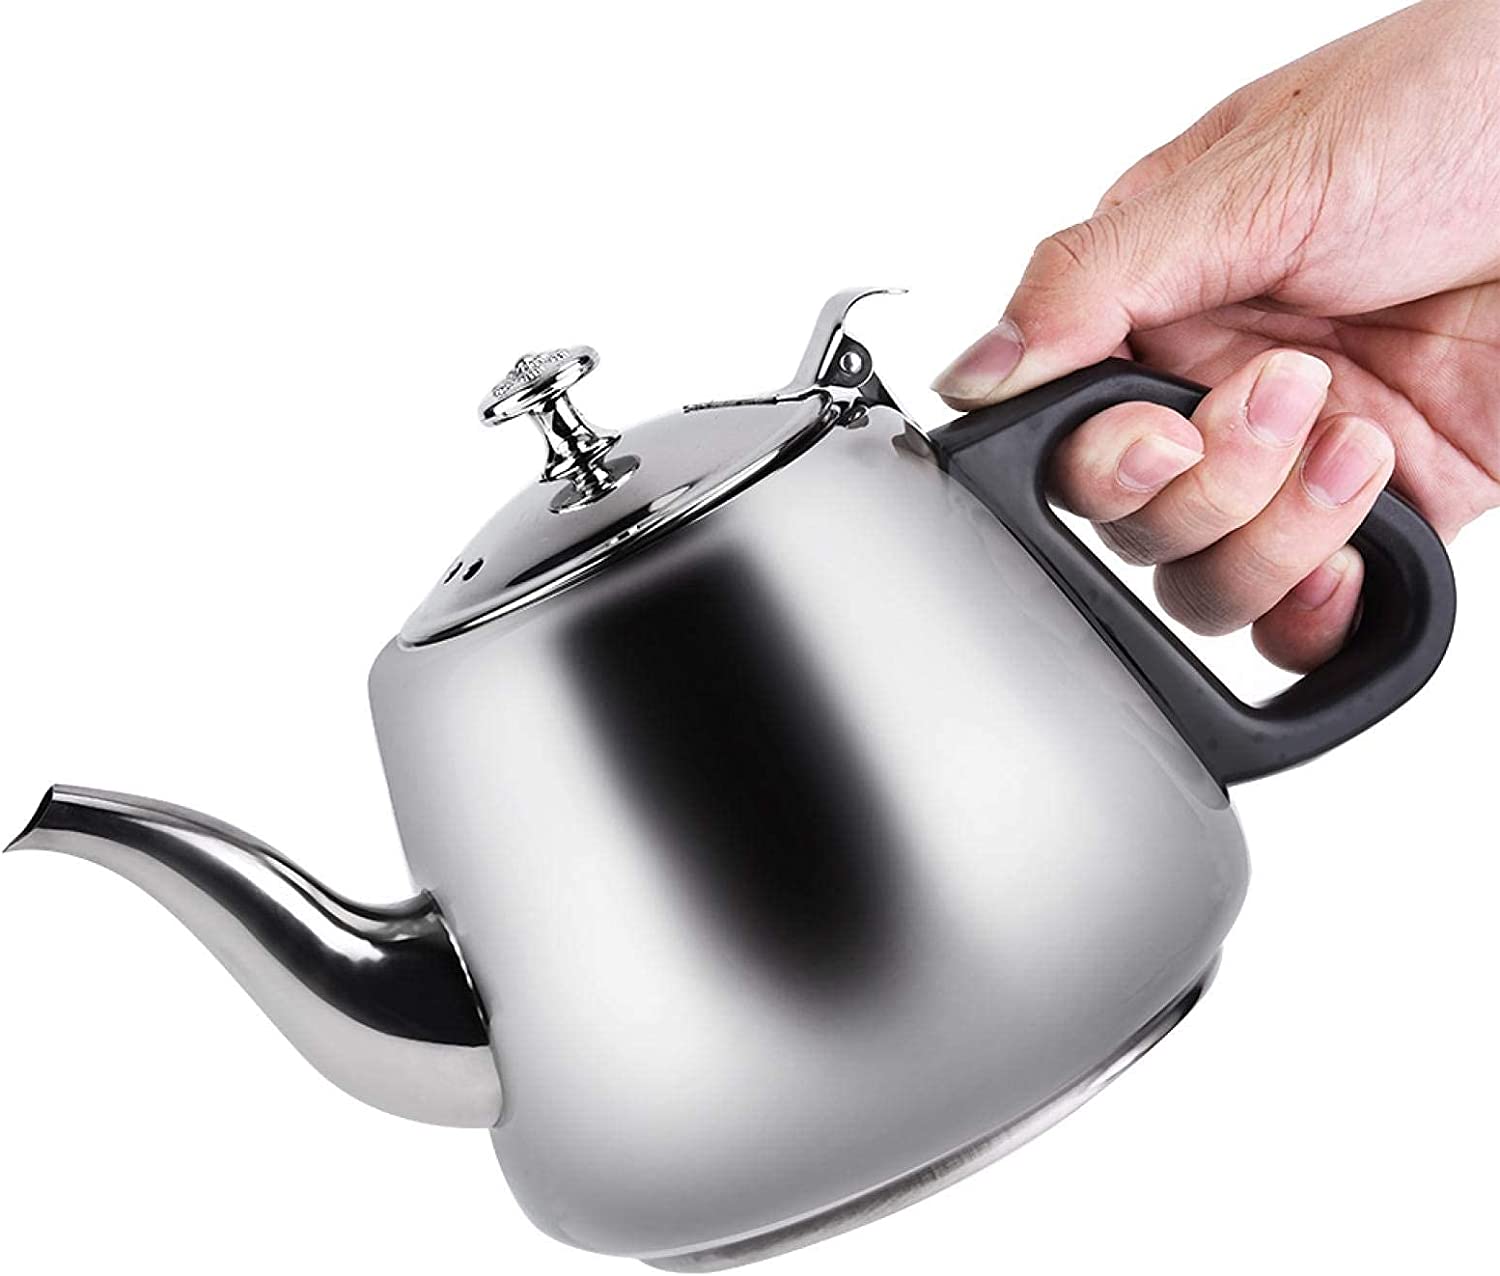 Raguso Stainless Steel Teapot, 1.5 L/2 Litre Durable Stainless Steel Stove Tea Coffee Pot Teware Hot Water Kettle with Filter for Home (1.5 L)